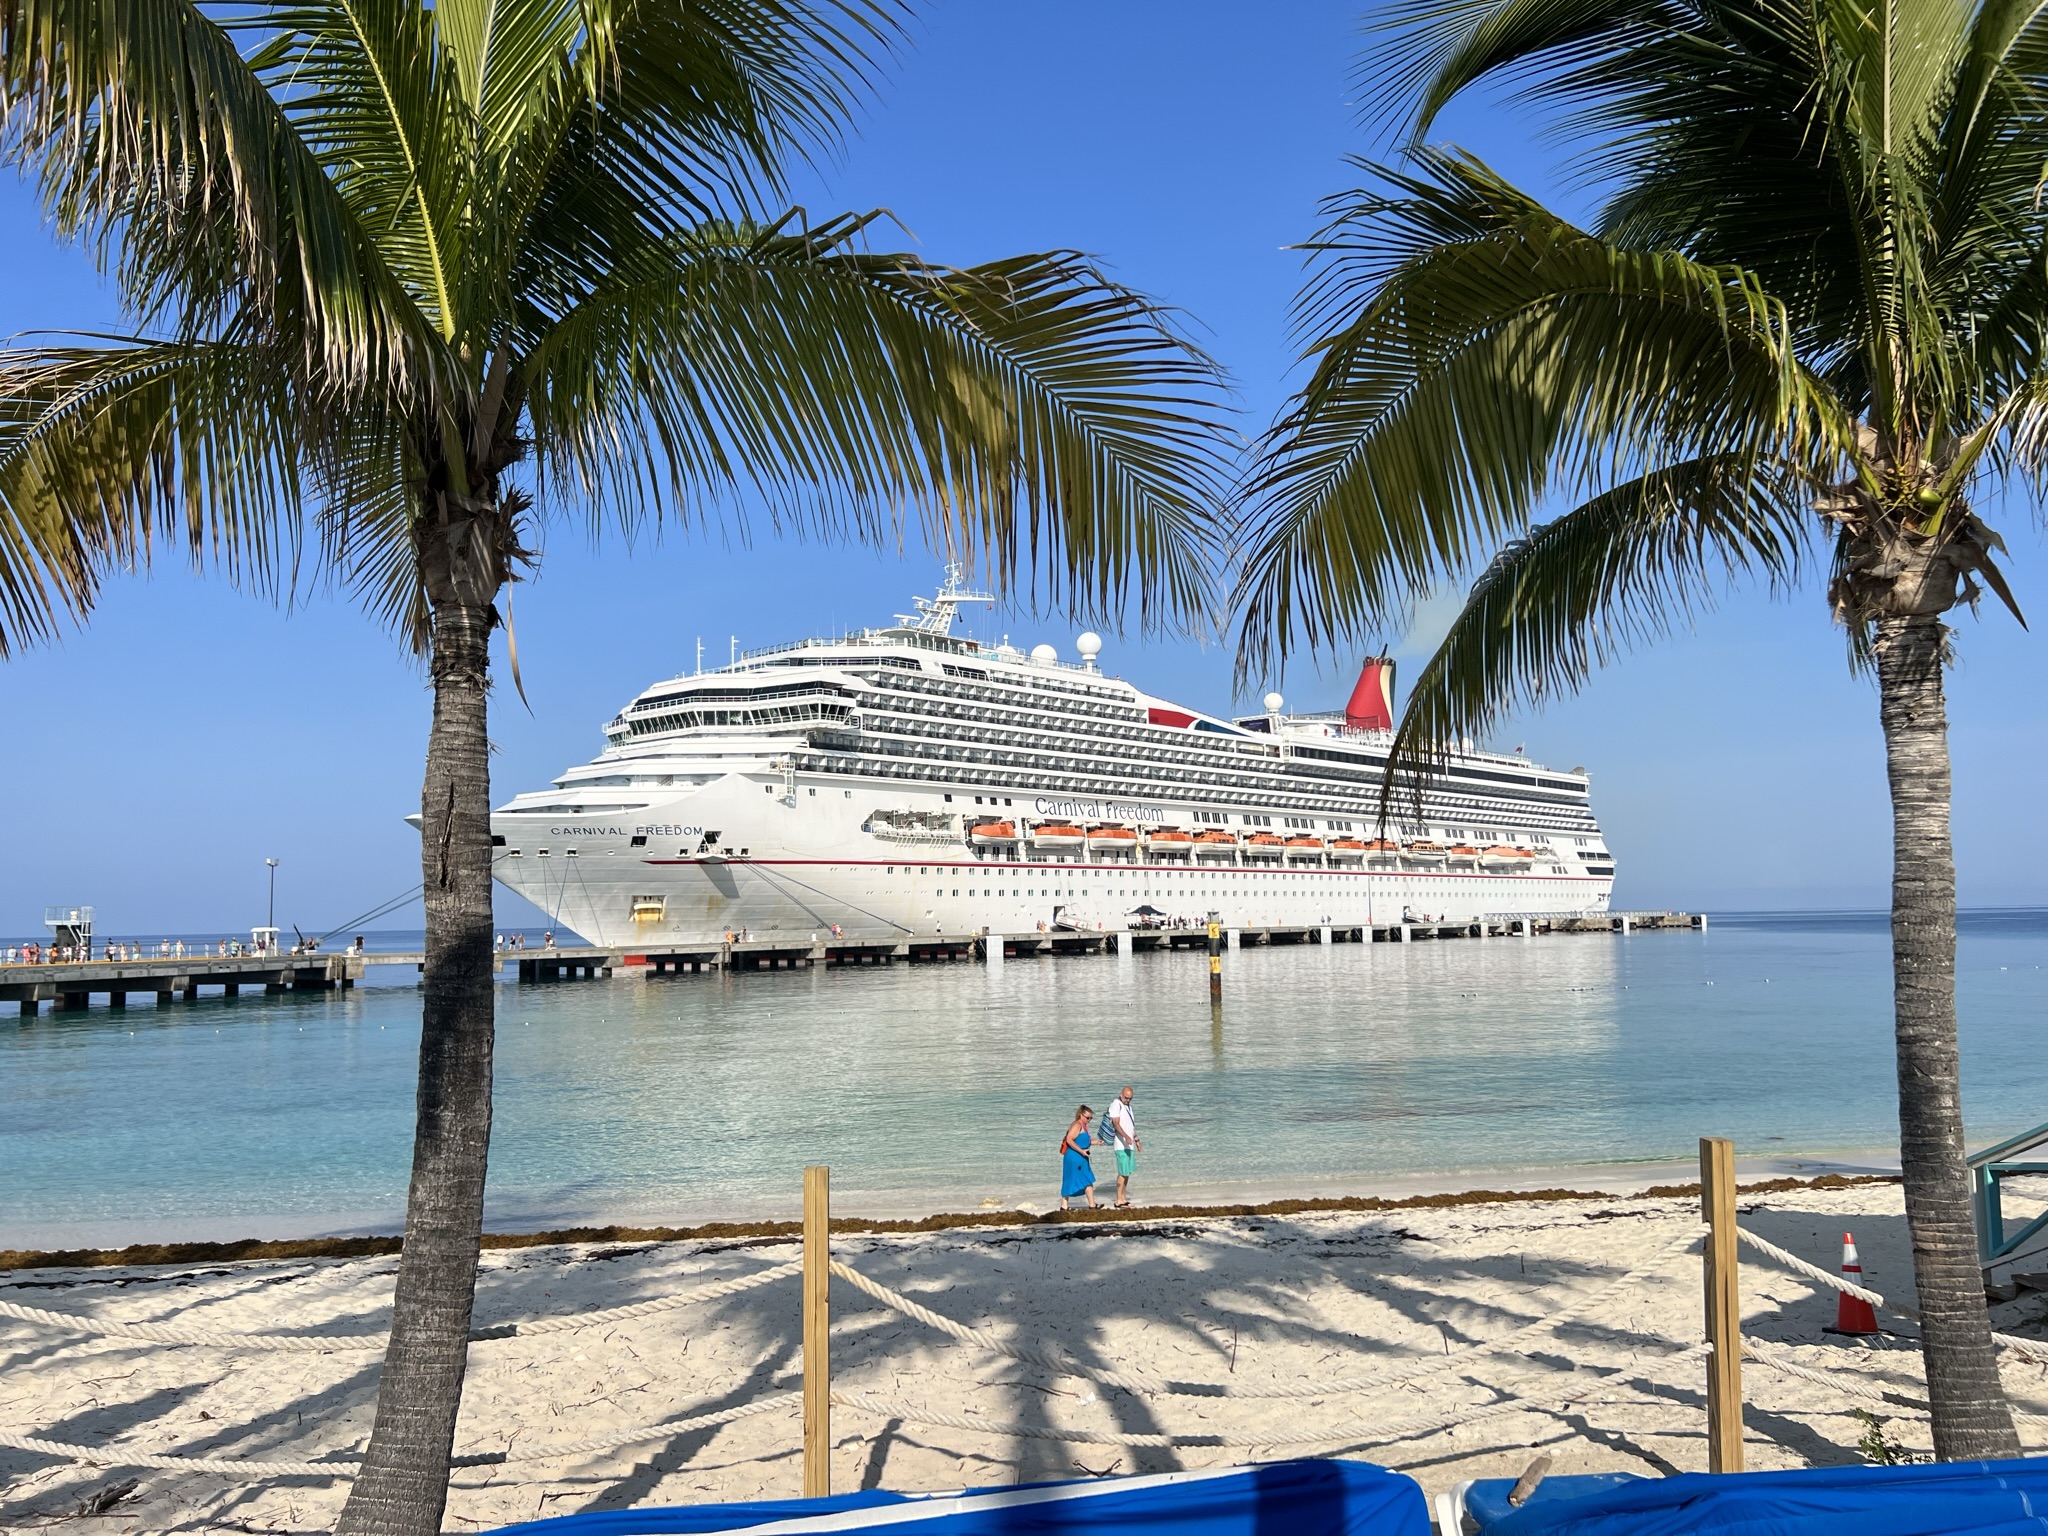 Cruise Shore Excursions – Grand Turk Cruise Center on Grand Turk Island in the Turks and Caicos